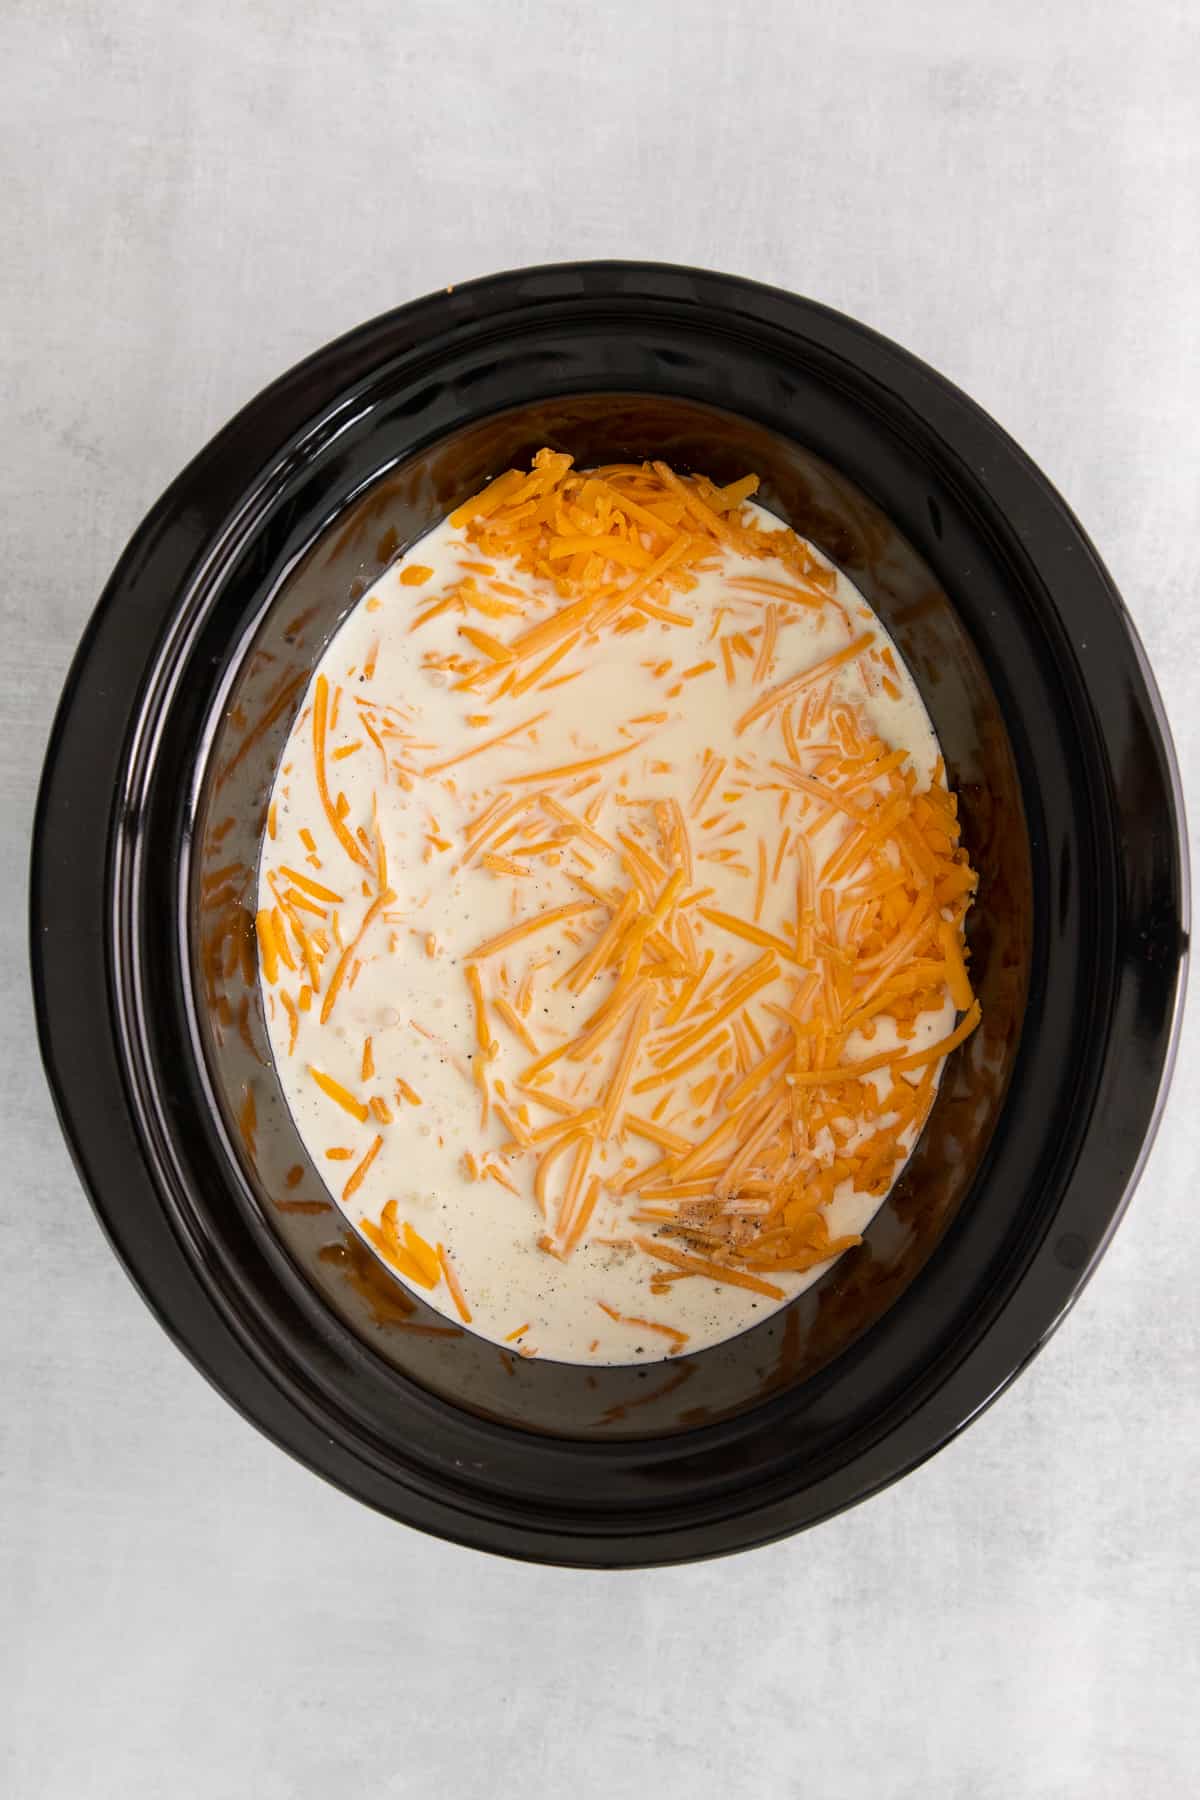 milk and cheese in crock pot.